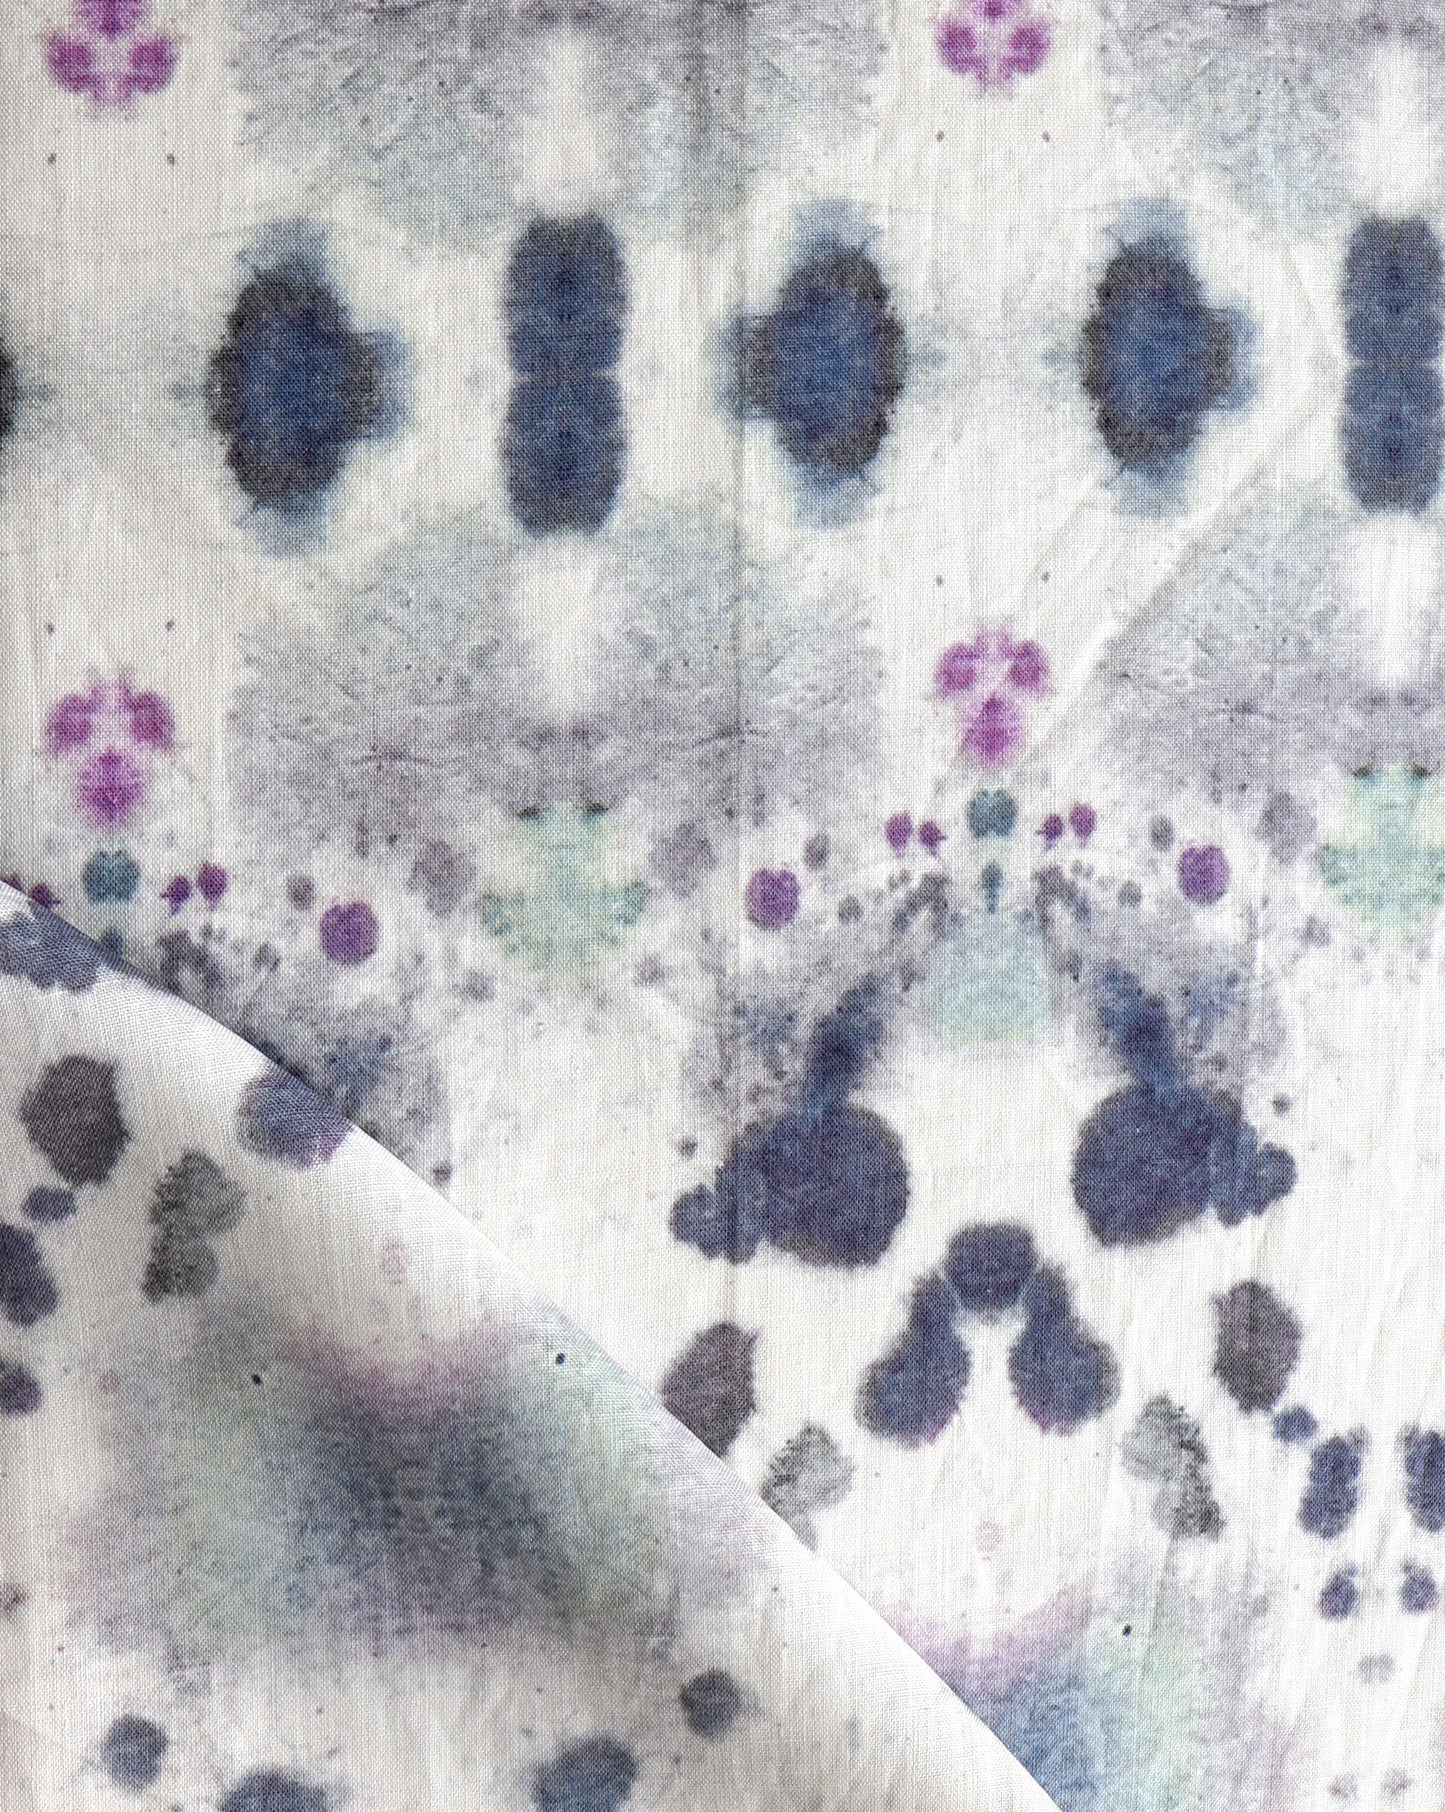 A close up of a blue and purple Species Fabric with a kaleidoscopic effect.